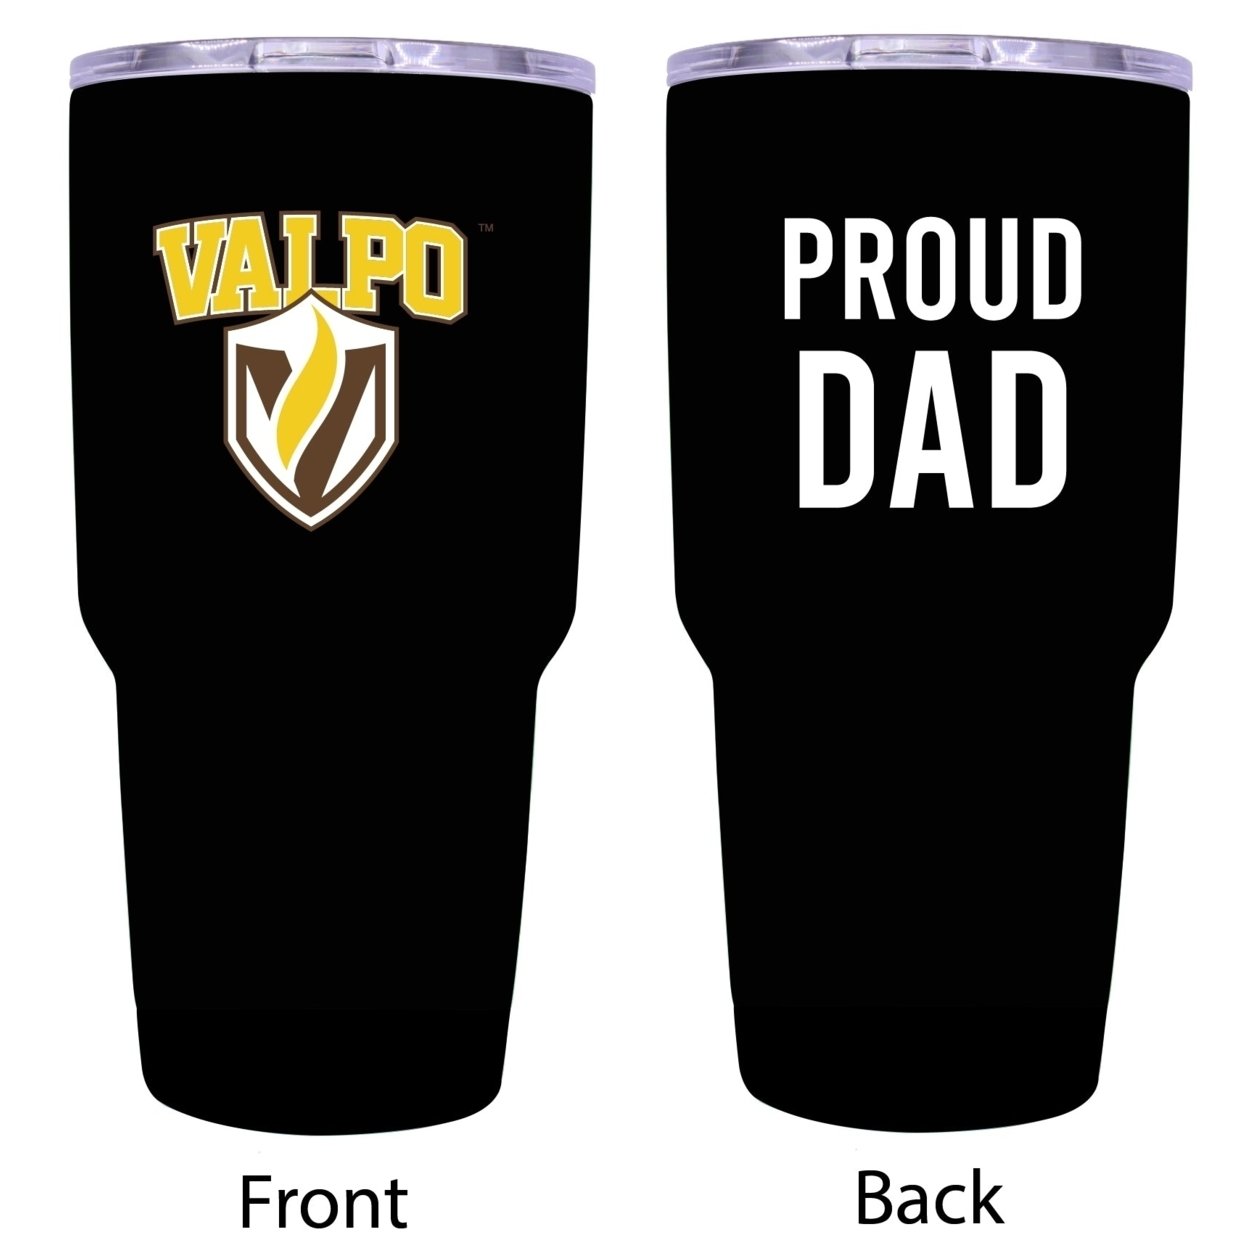 R And R Imports Valparaiso University Proud Dad 24 Oz Insulated Stainless Steel Tumblers Black.